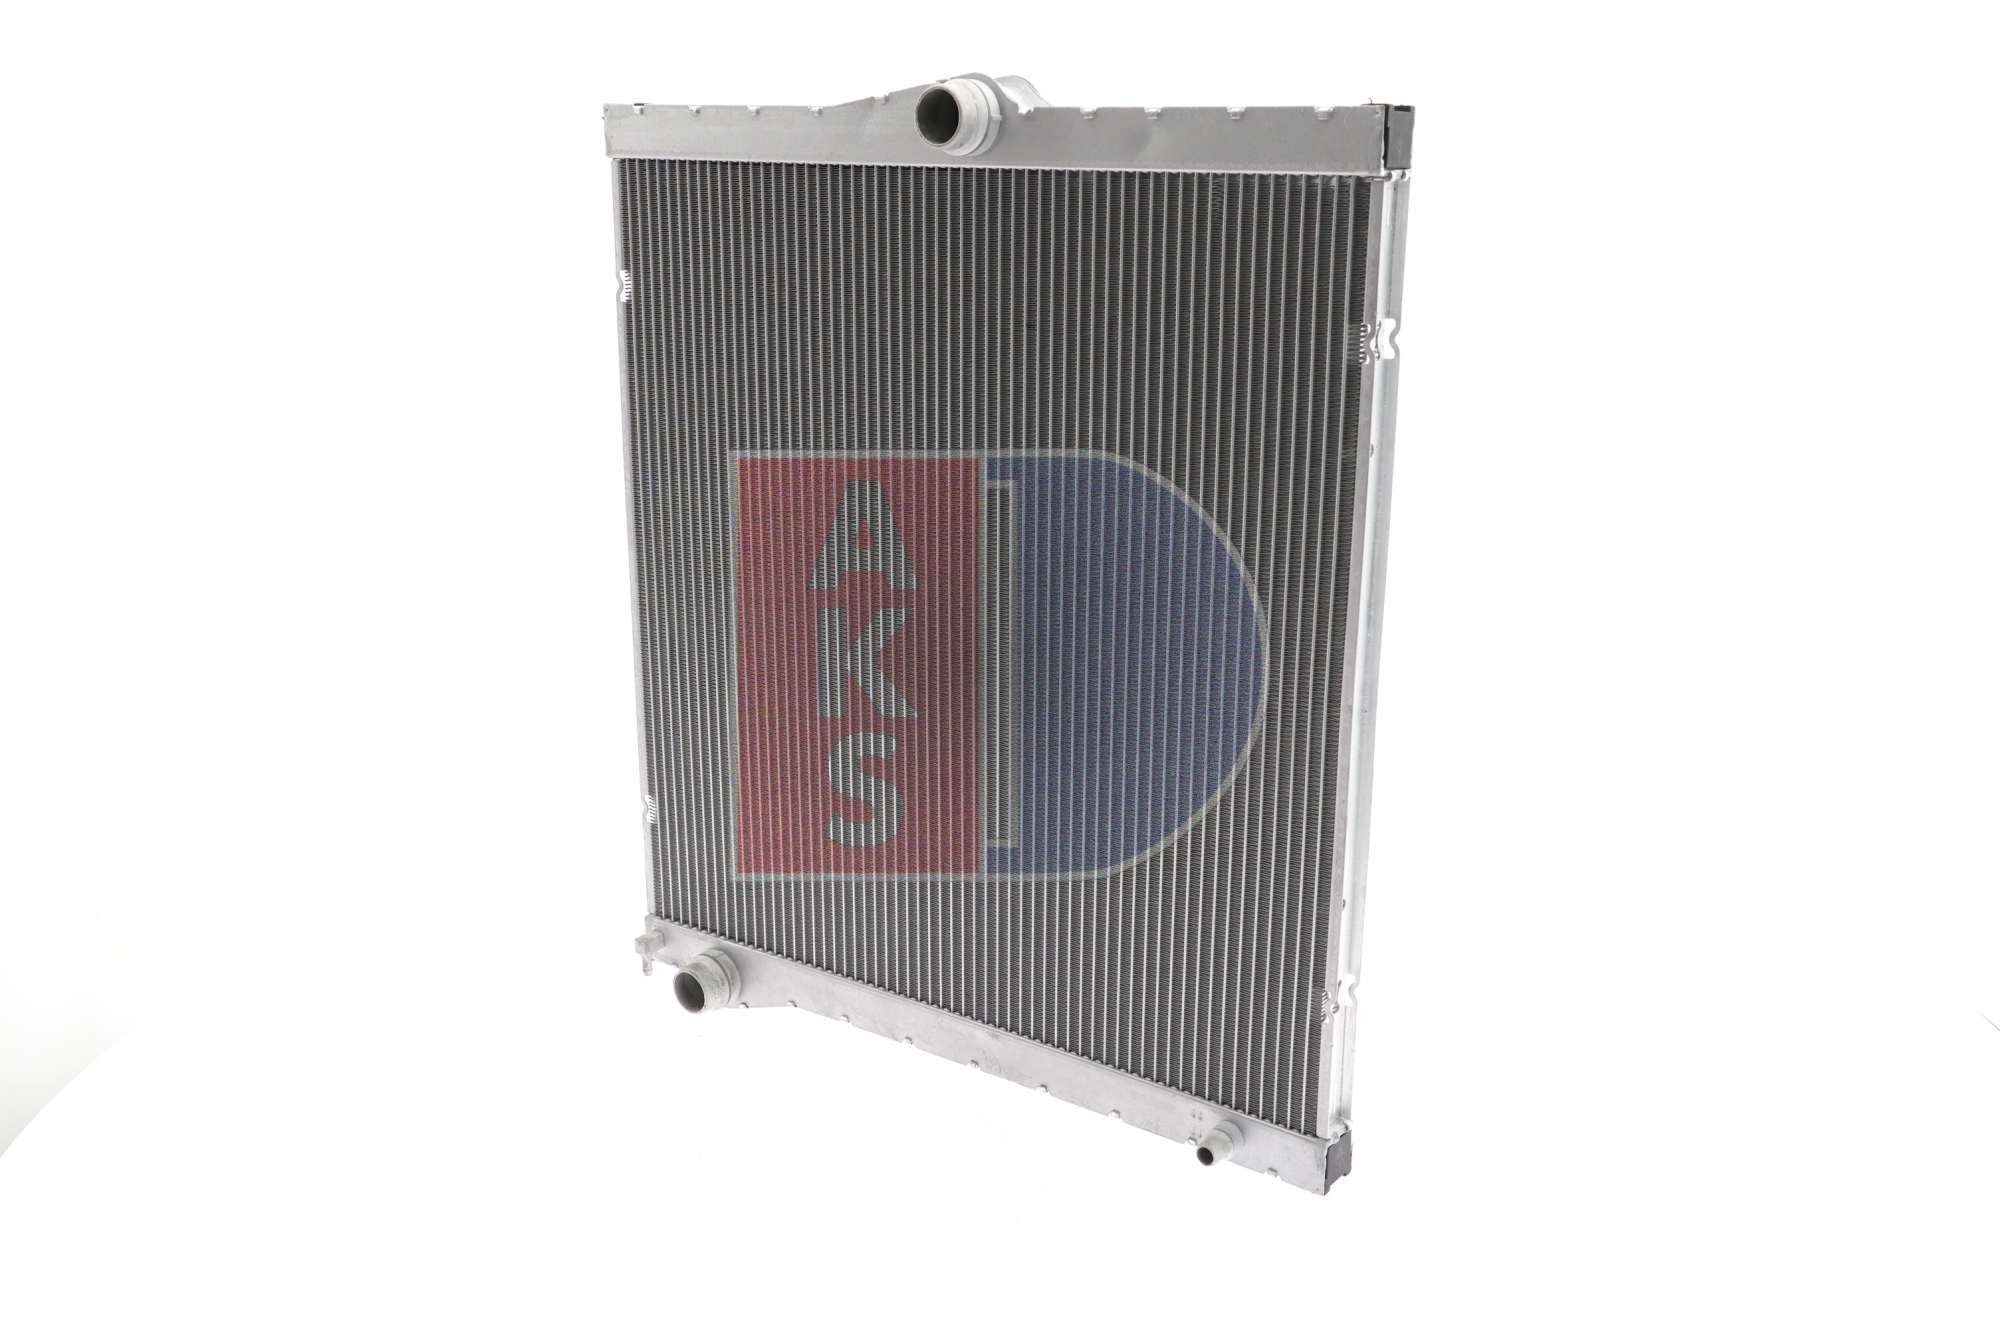 050065N AKS DASIS Engine radiator Aluminium, 580 x 595 x 32 mm, Brazed  cooling fins for BMW X5 E70 ▷ AUTODOC price and review